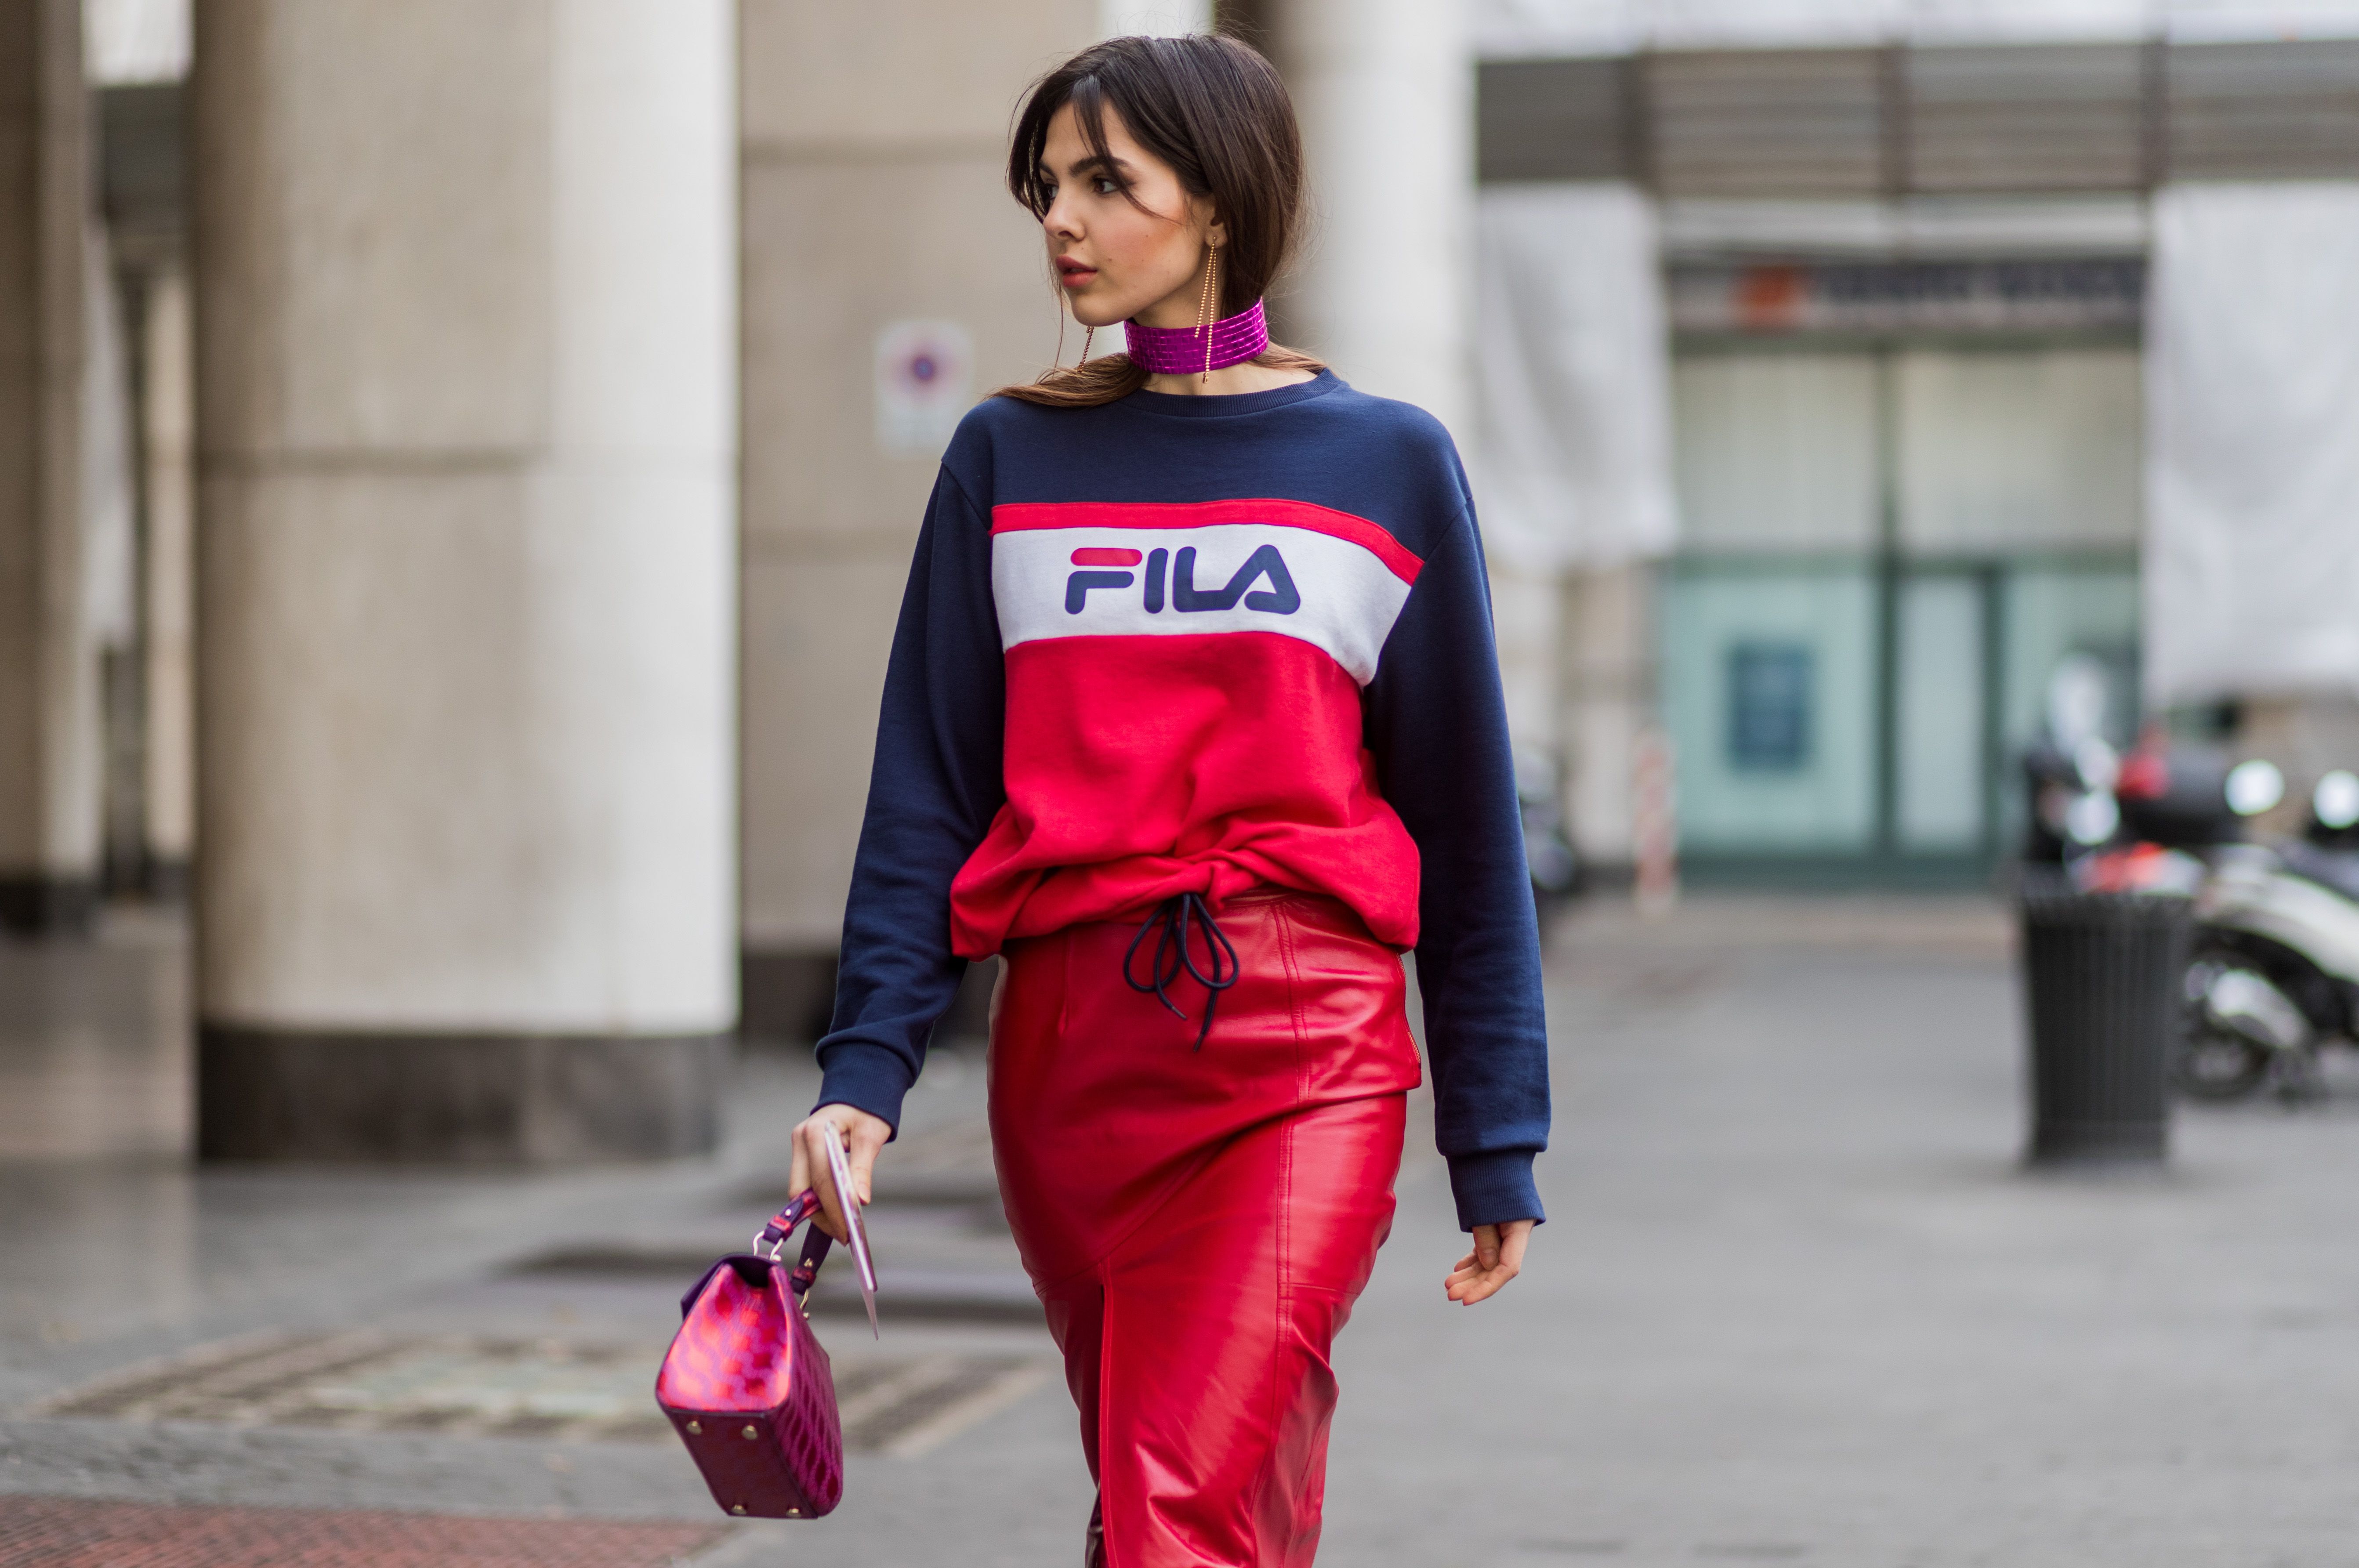 Fila Model Laptop Full HD 1080P HD 4k Wallpaper, Image, Background, Photo and Picture